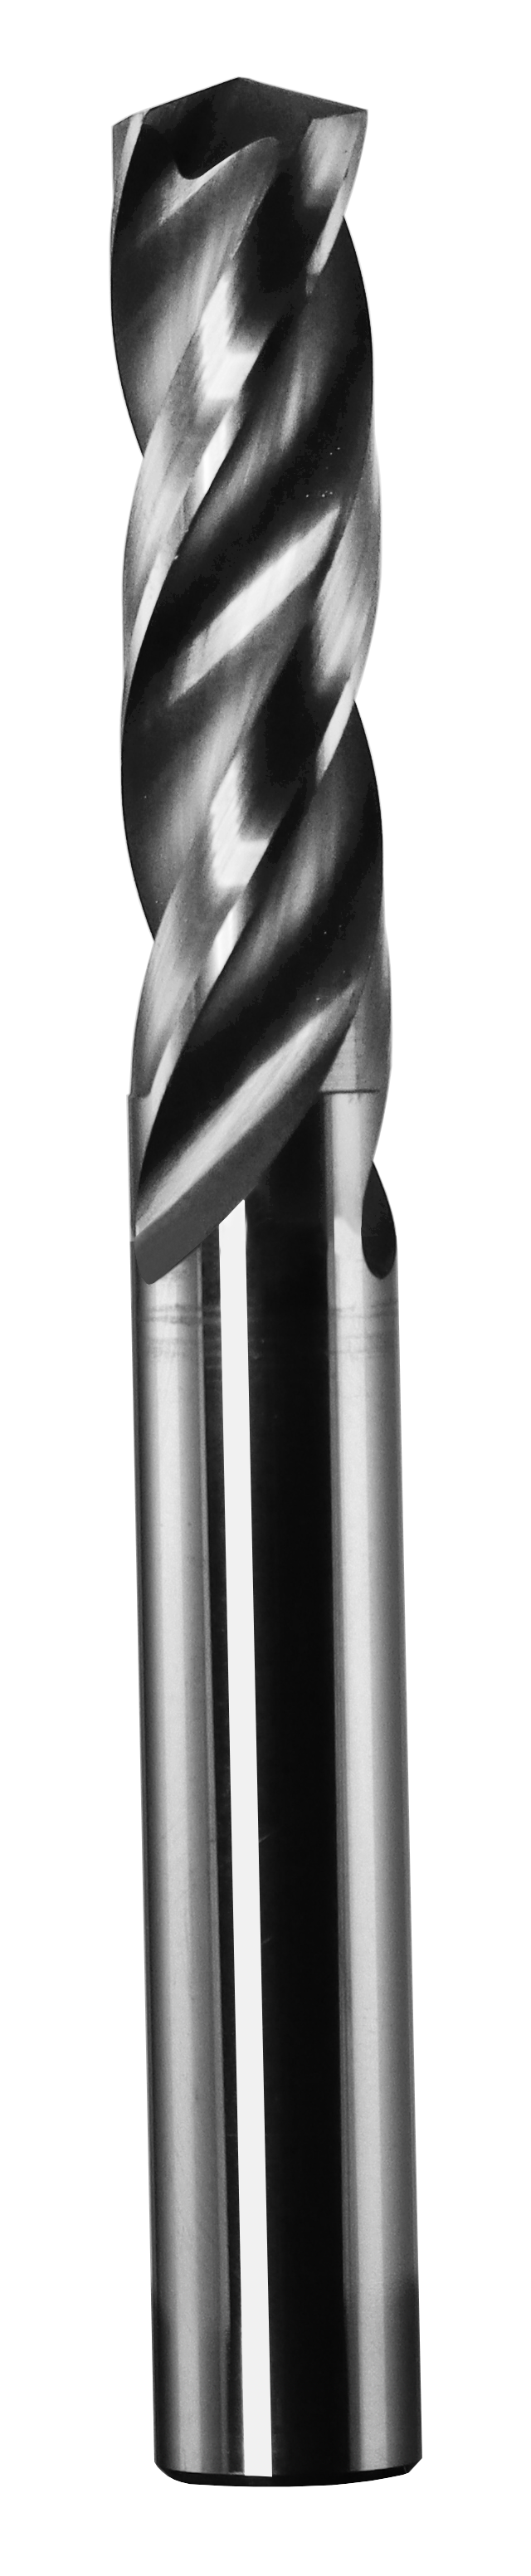 3.50mm Dia, 150 Degree Point, Solid Carbide Drill - 63002